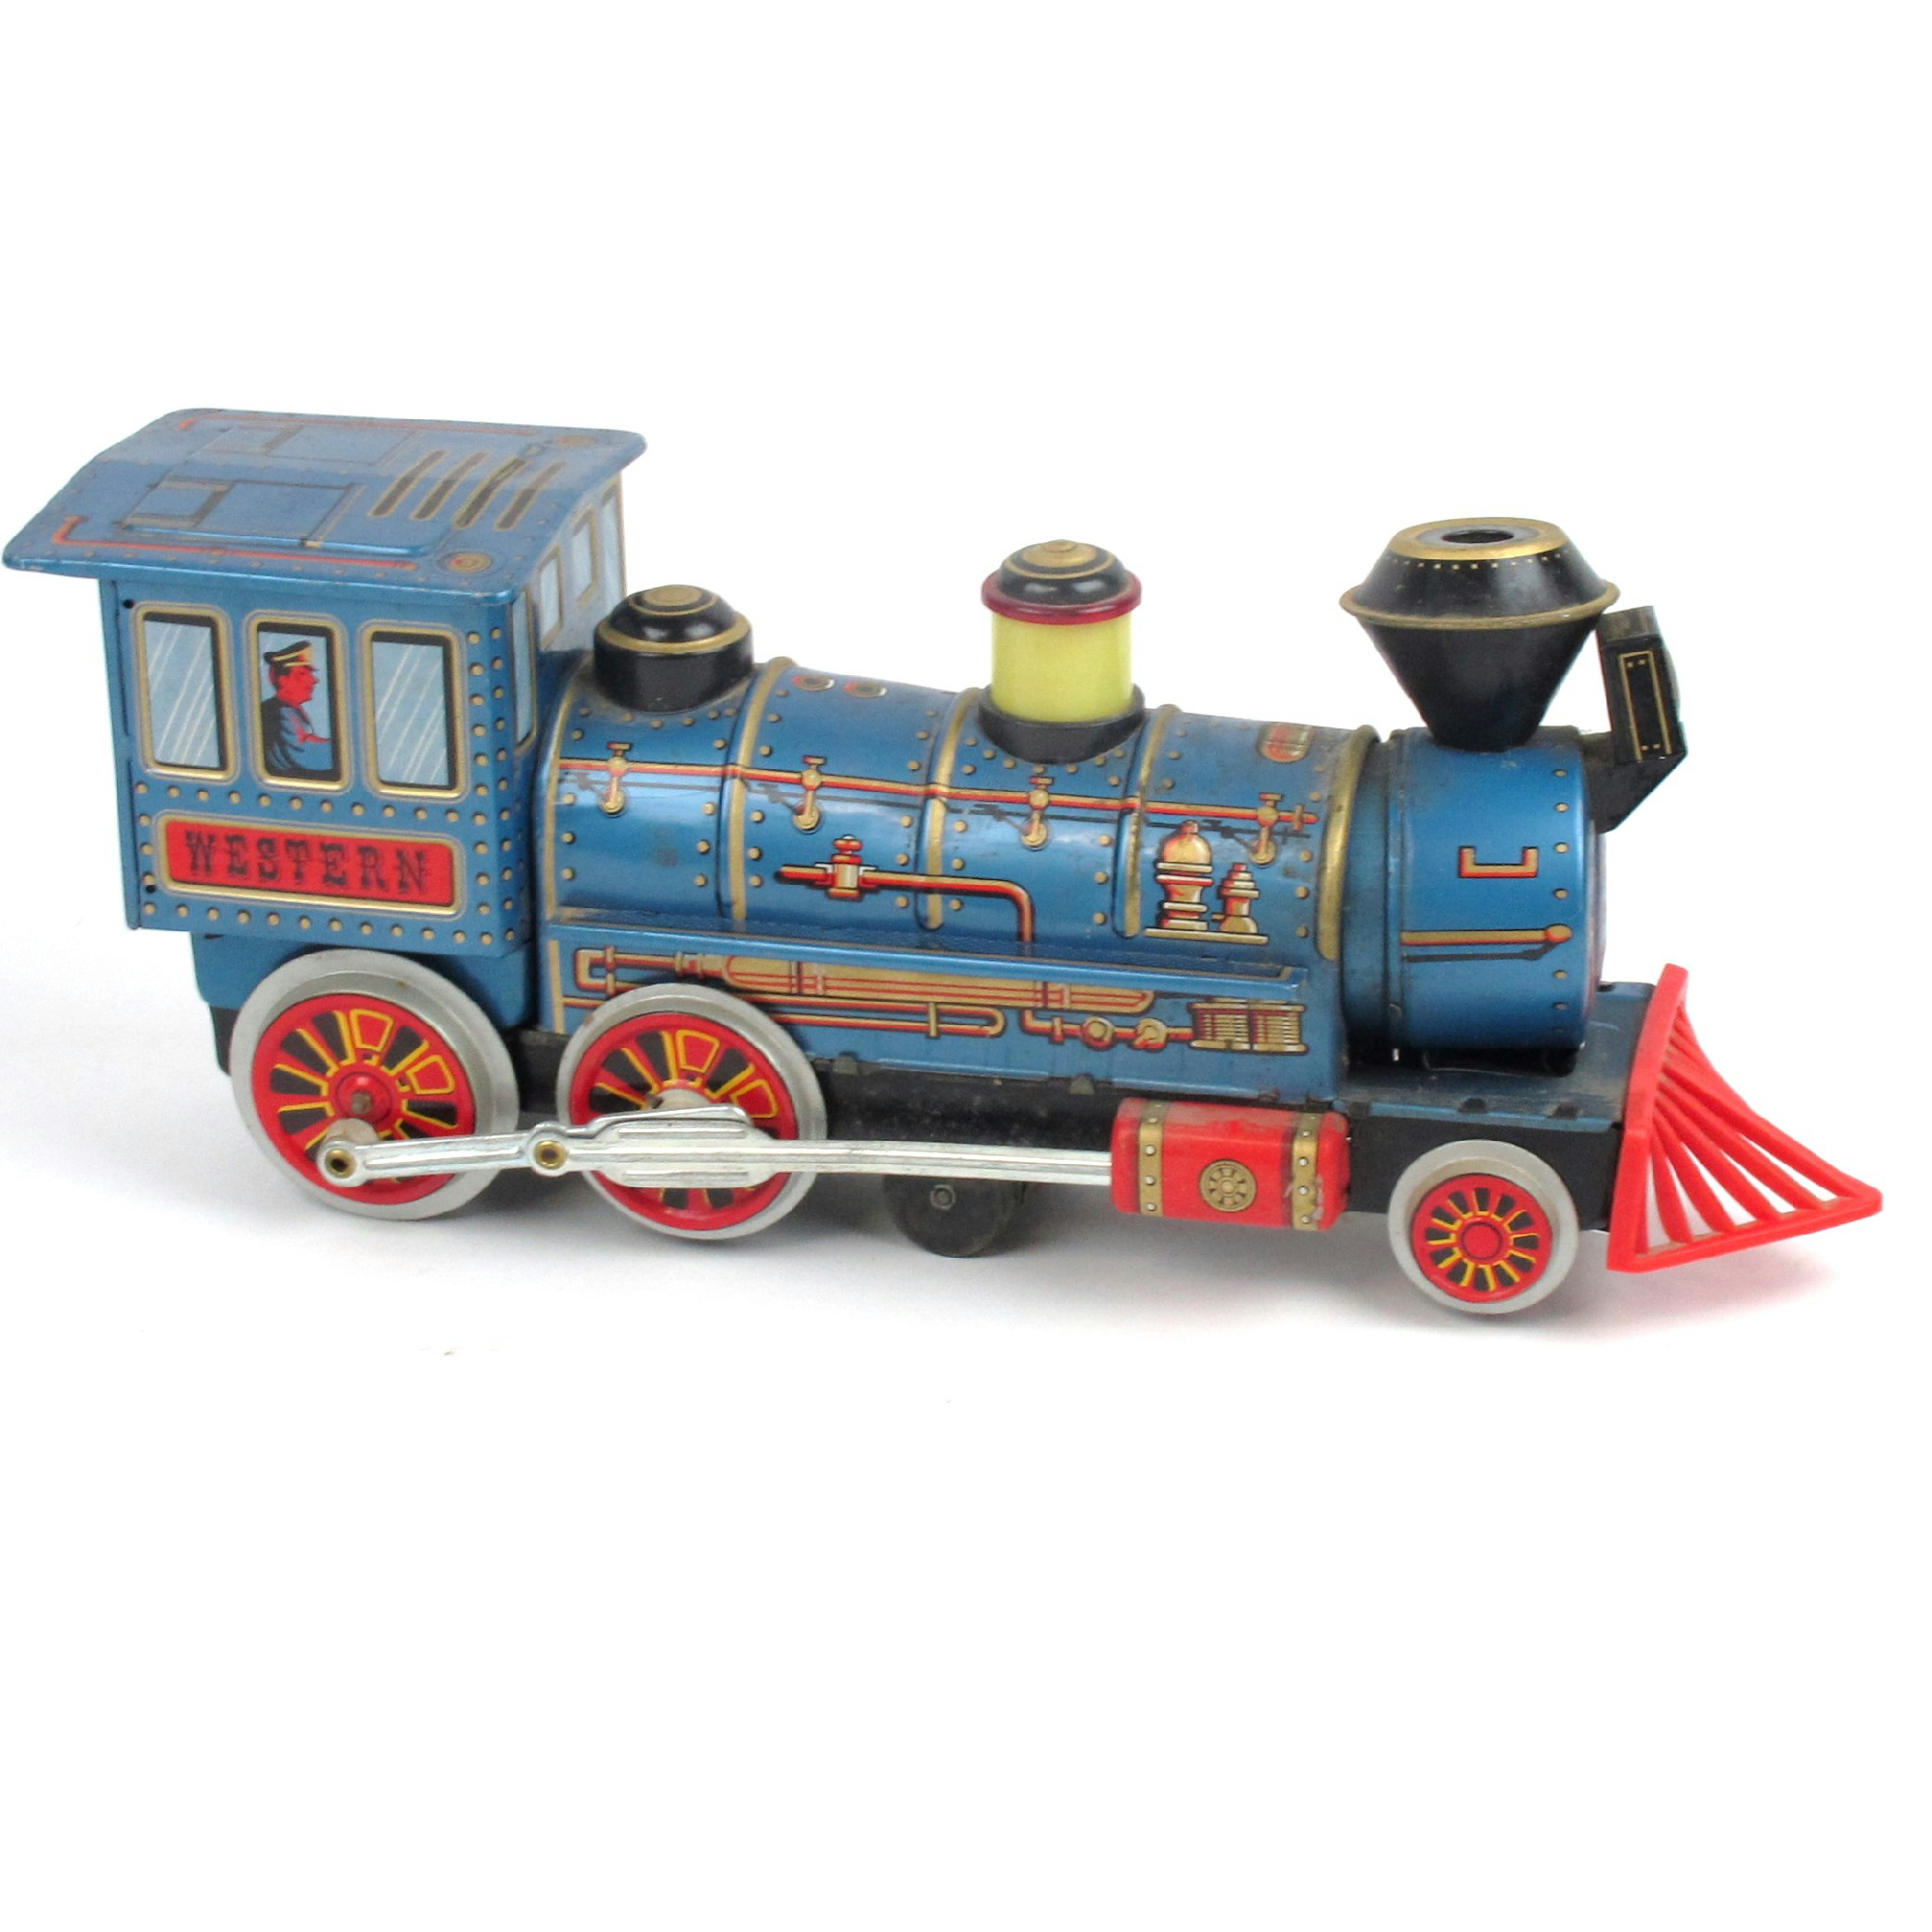 Toy Train Images Pictures | Online Images Collection